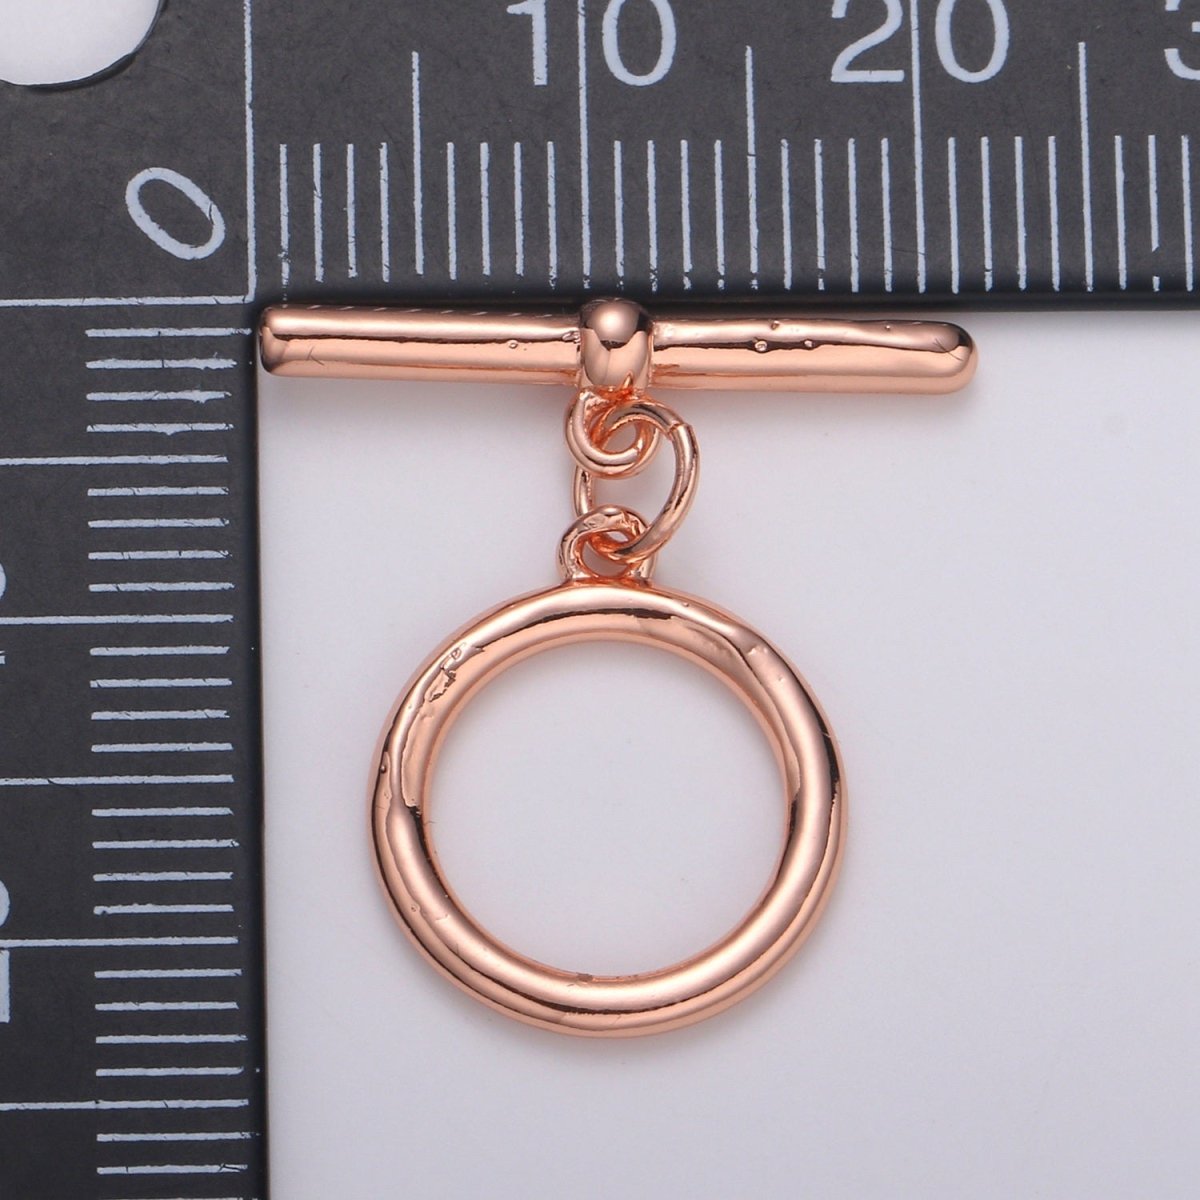 24K Gold Toggle Clasp with jump ring chose color-Gold, Rose Gold Black, Silver OT Clasp for Jewelry Making Supply L-140 L-214 L-215 L-216 - DLUXCA